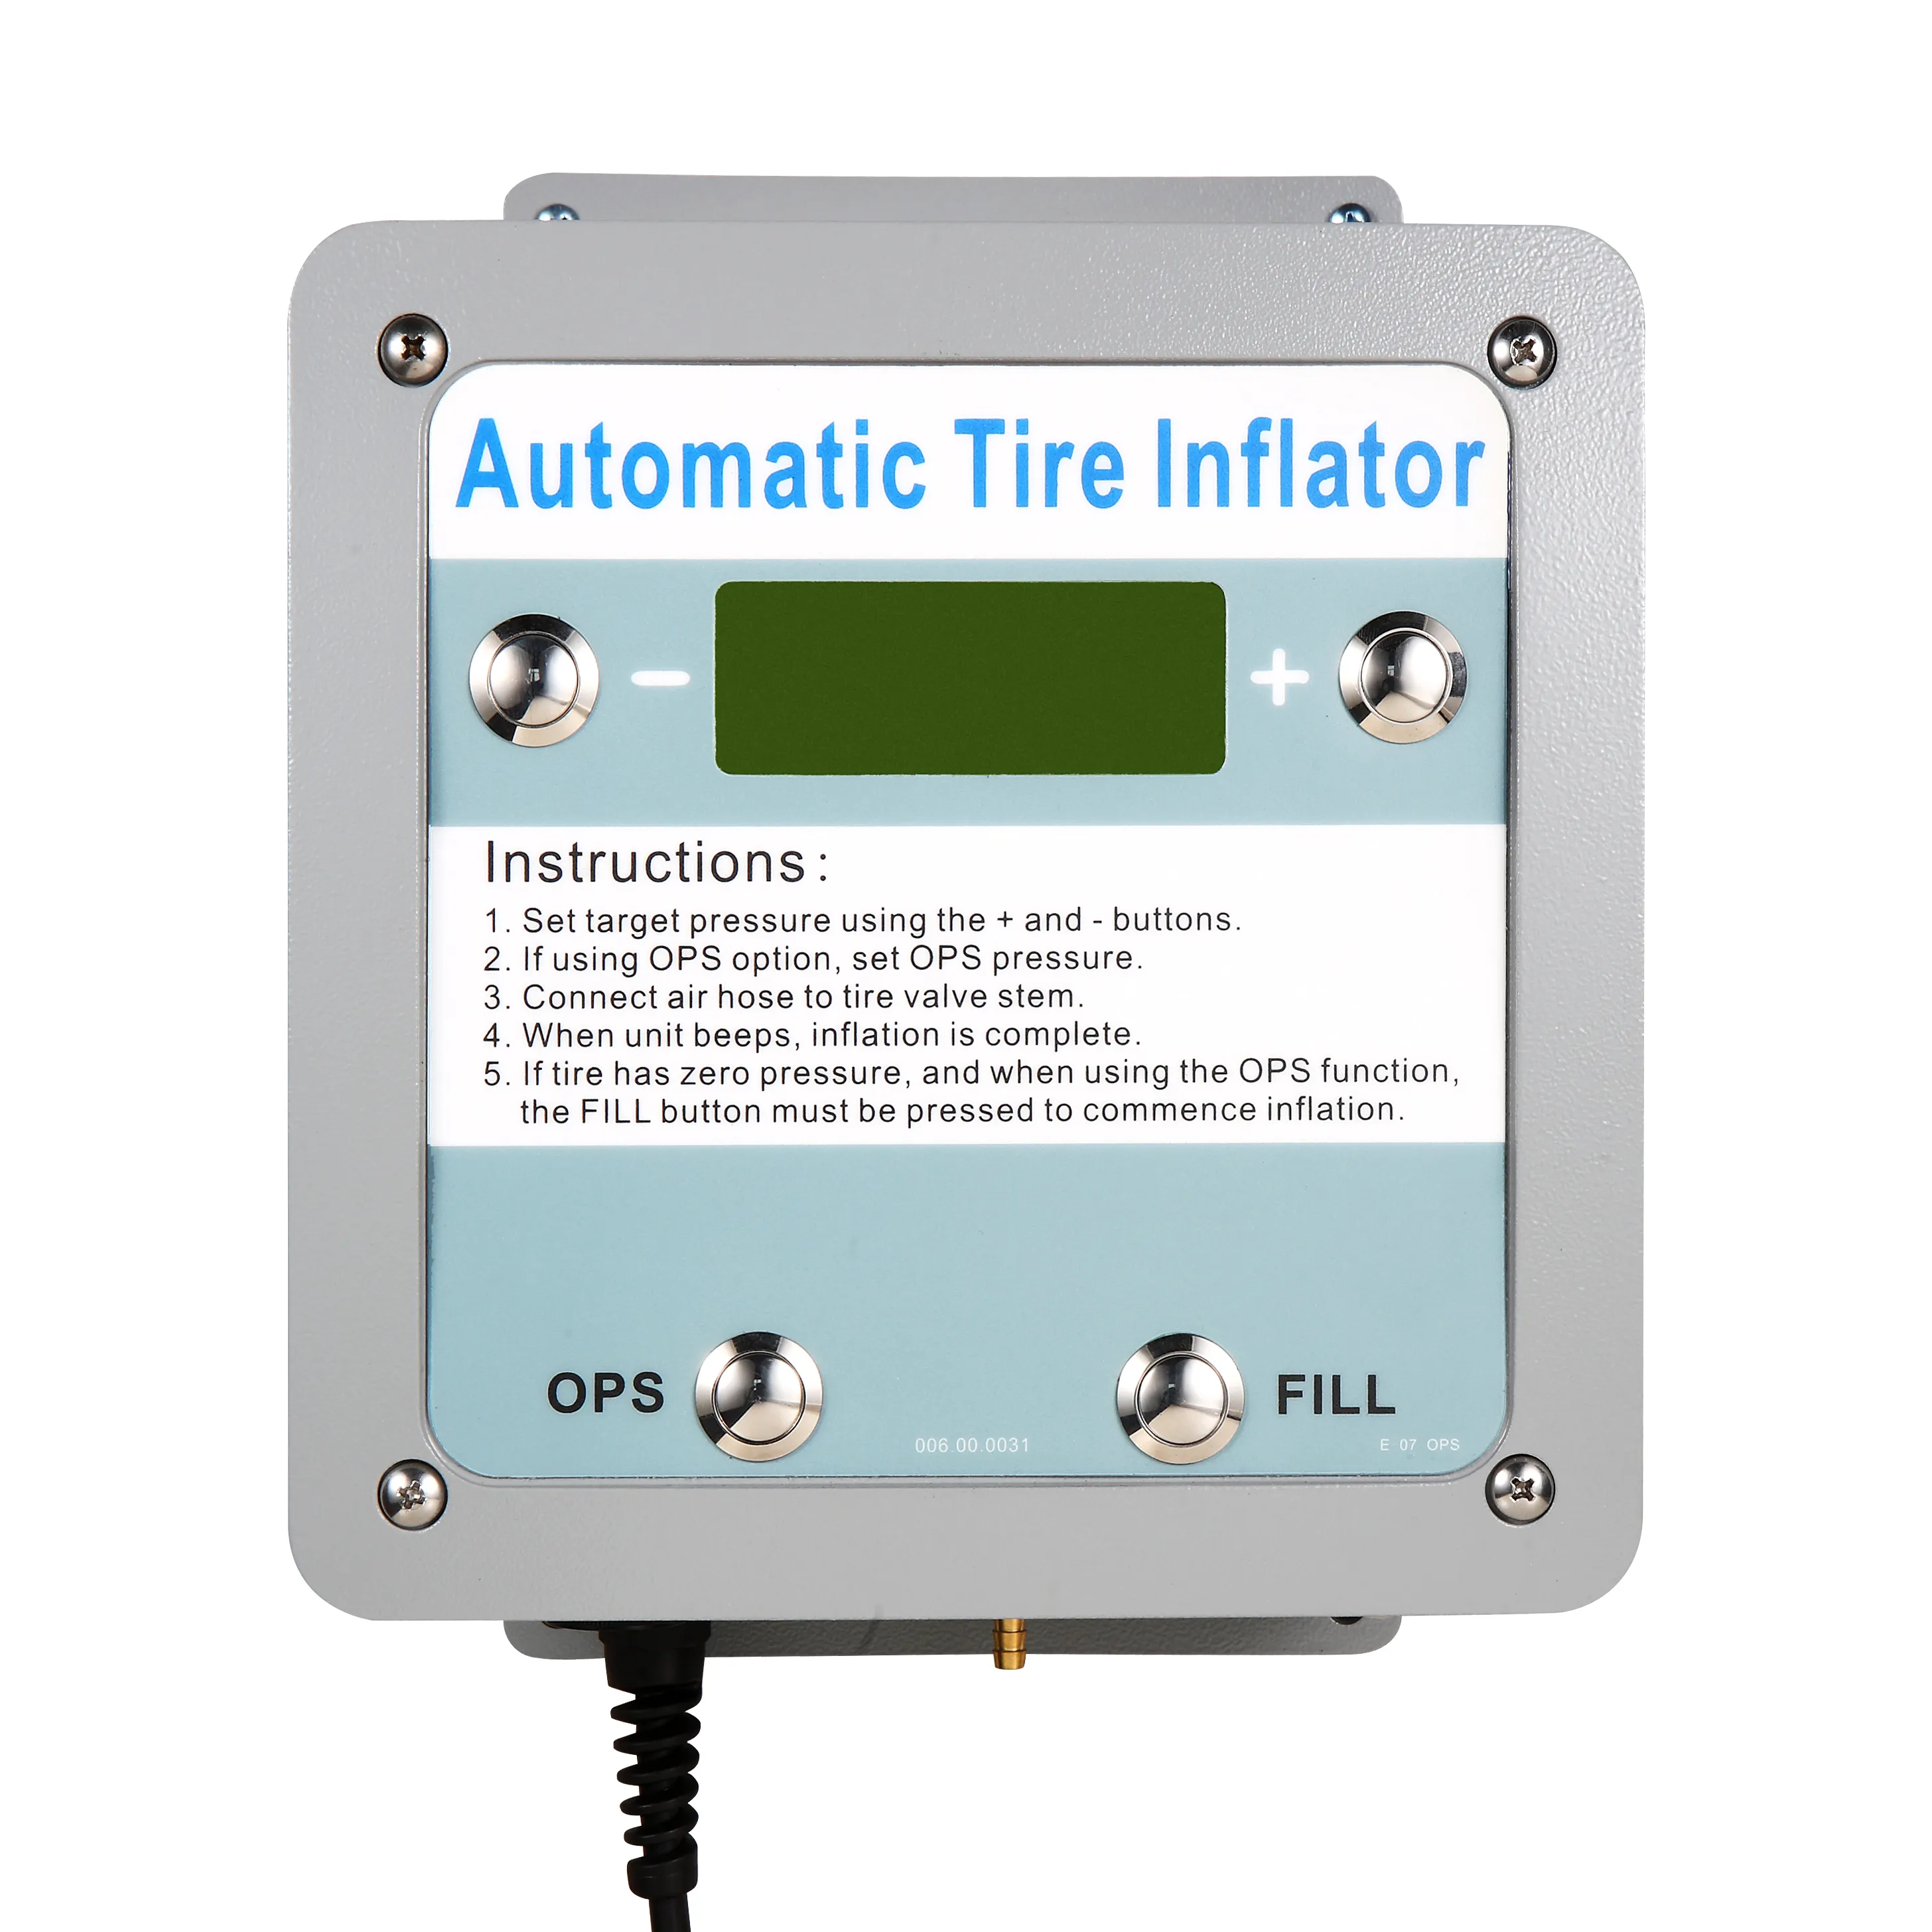 G5 Cars Airpumps Machine Tyre Inflators Automatic Digital Wall Mounted workshop used Tire Inflators